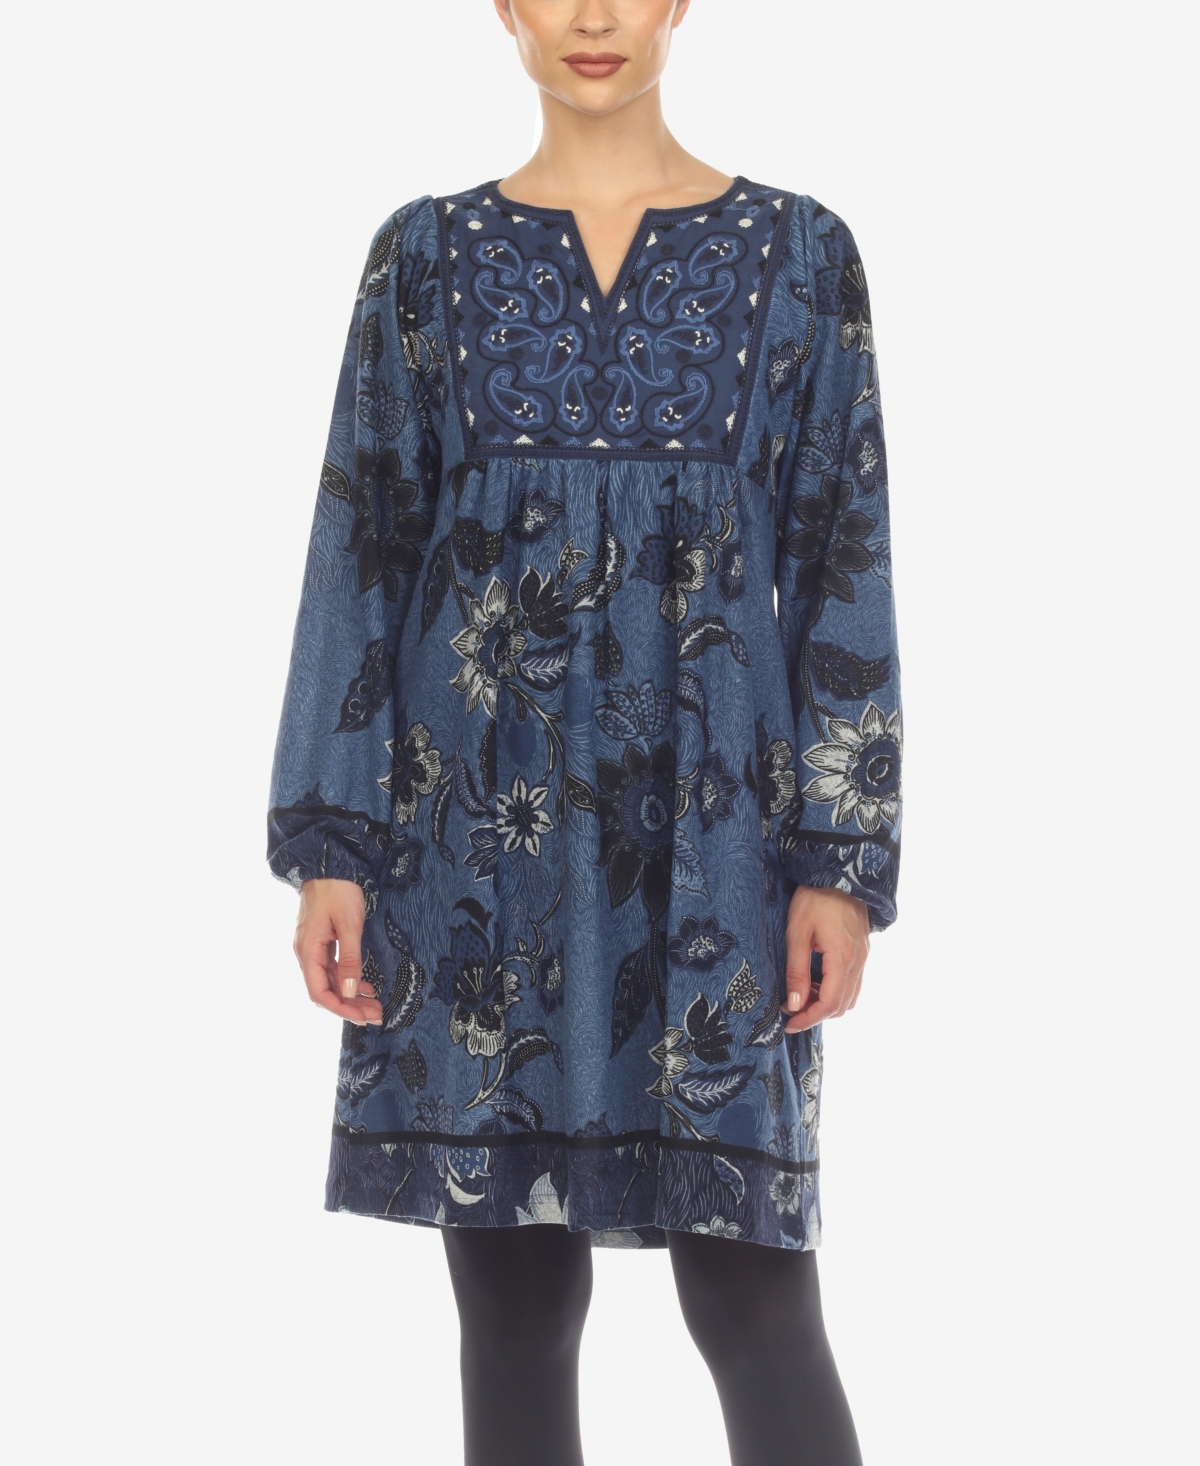 Women's Paisley Flower Embroidered Sweater Dress - Black